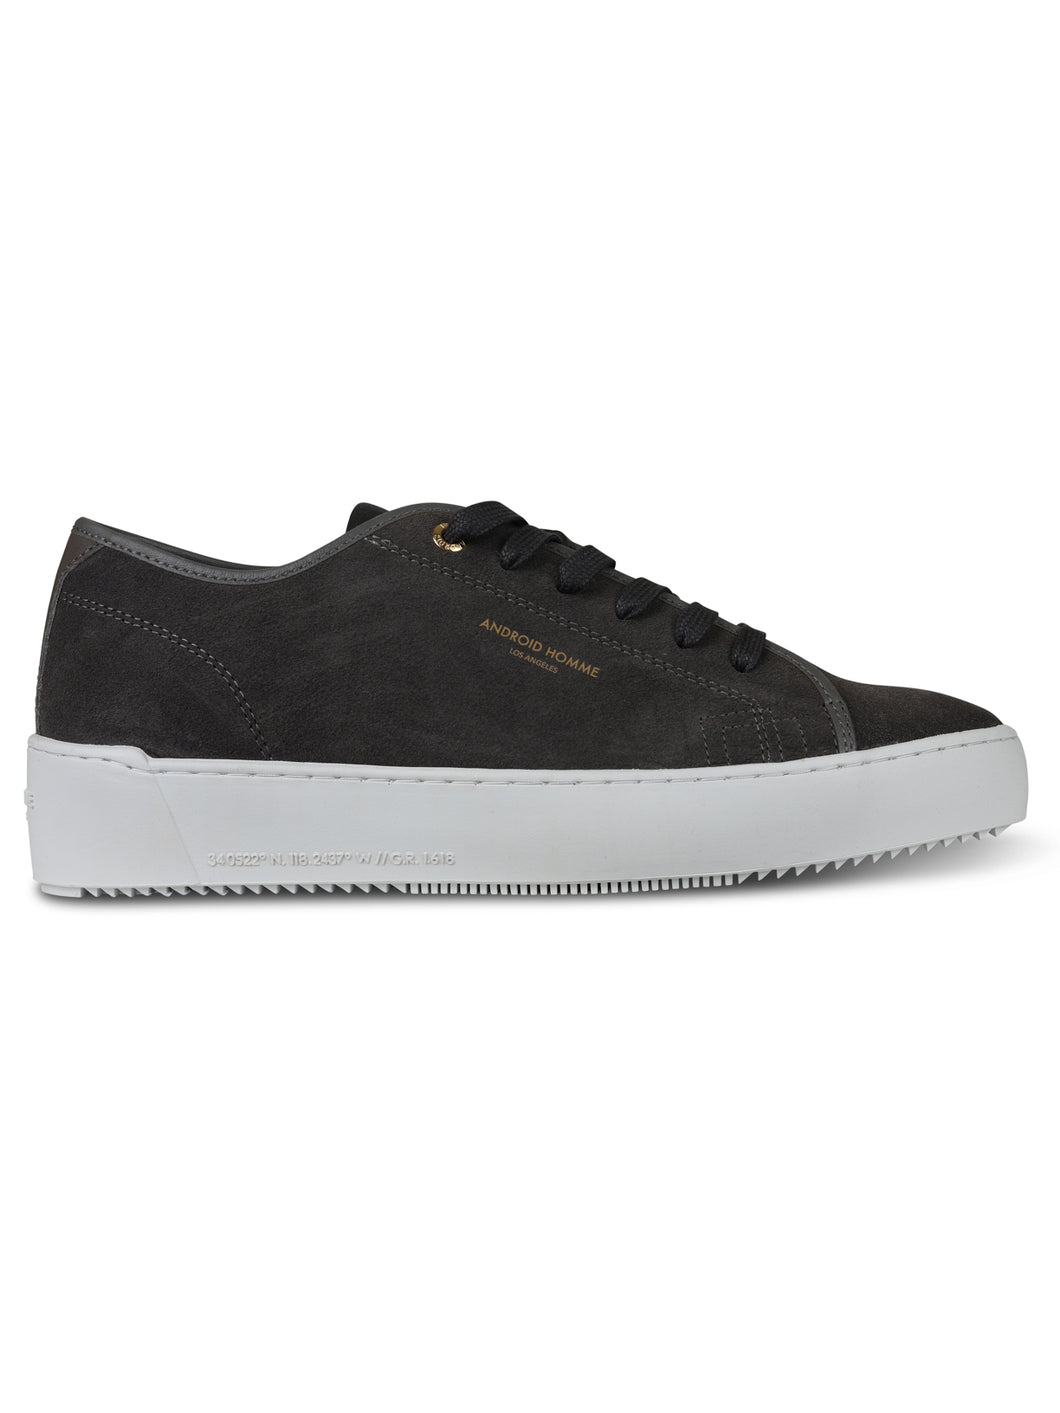 Android Homme Sorrento Suede Grey